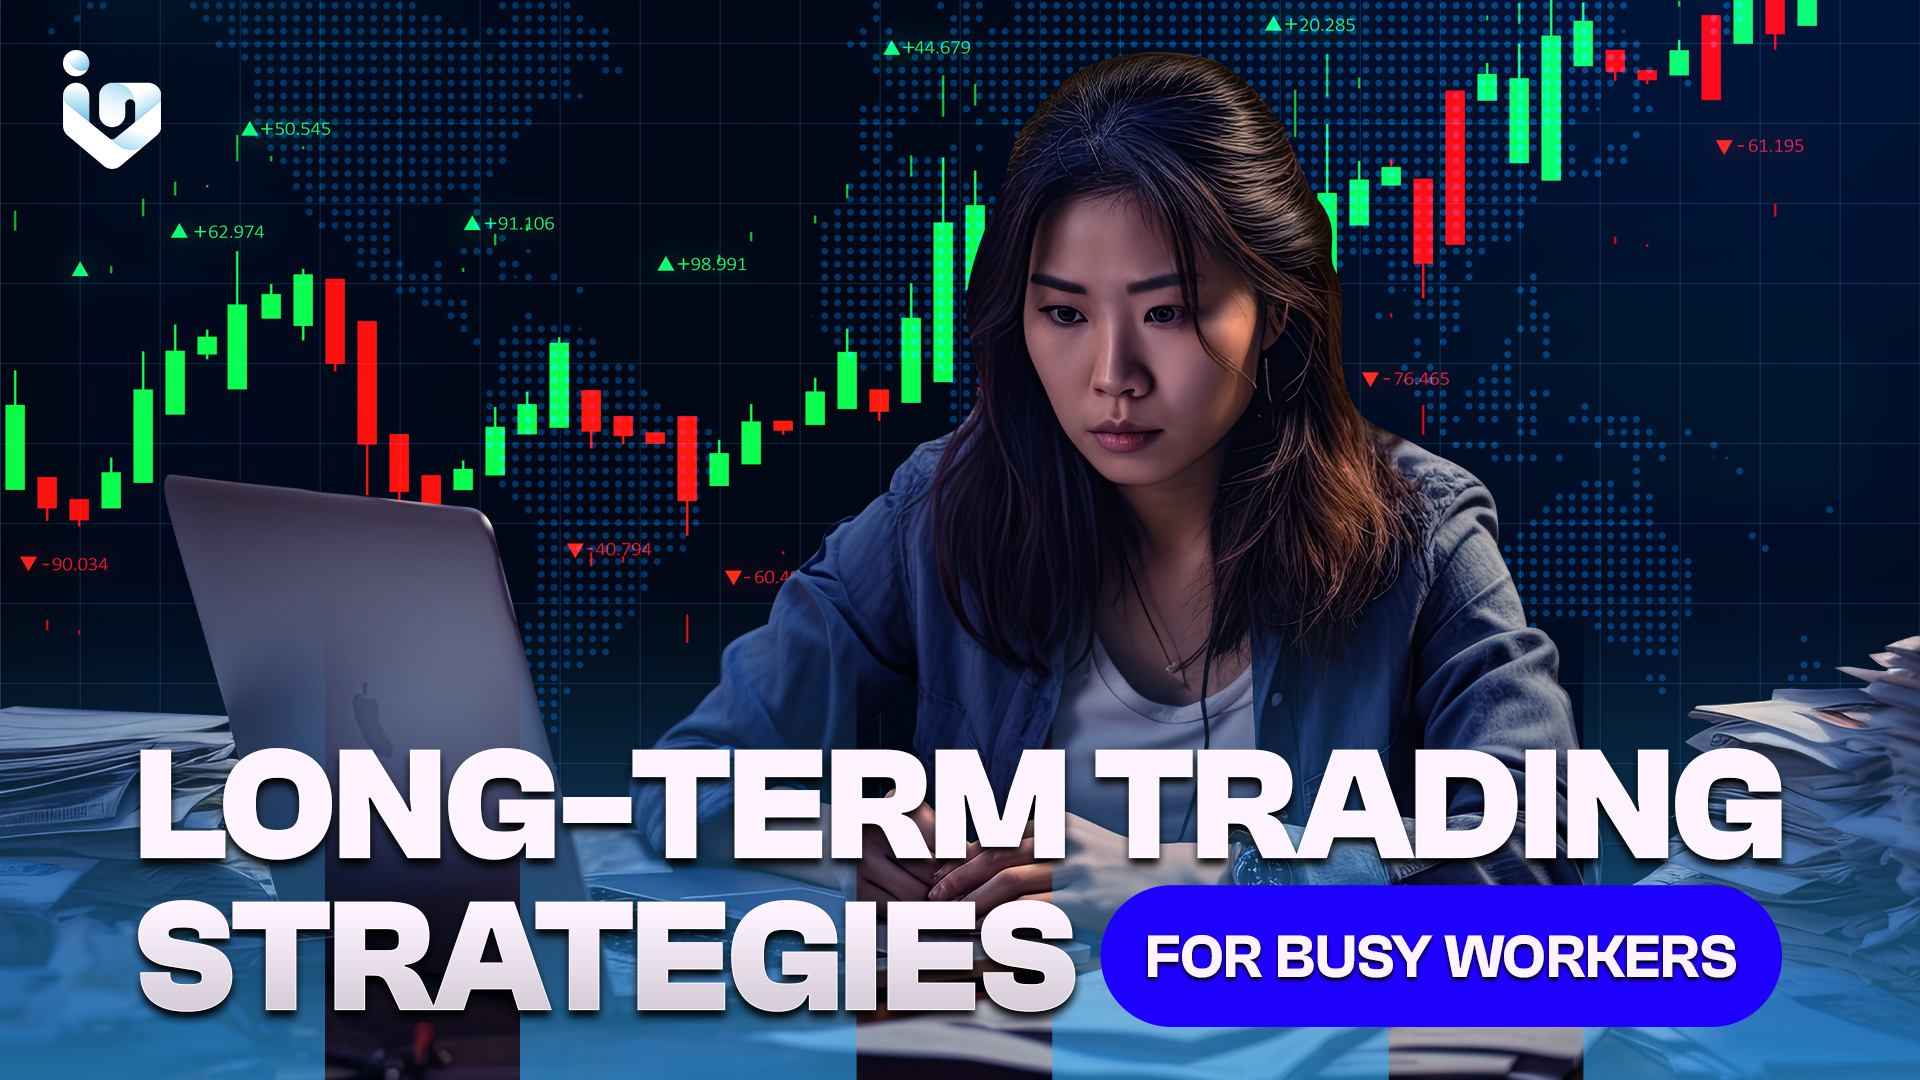 Long-term trading strategies for busy workers